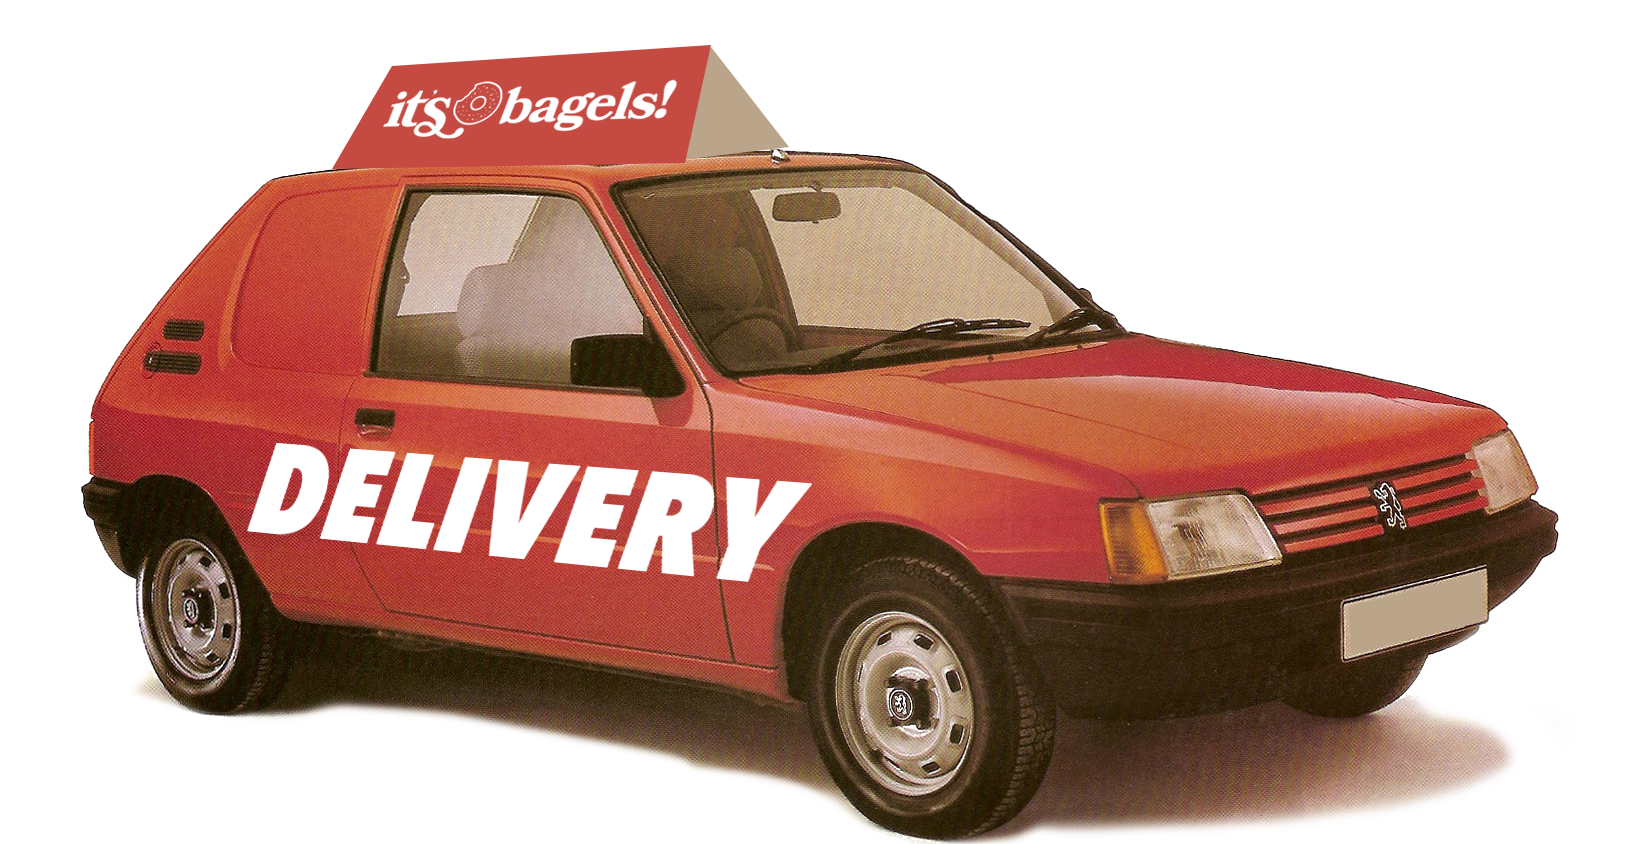 A red delivery car with an It's Bagels sign on the roof.